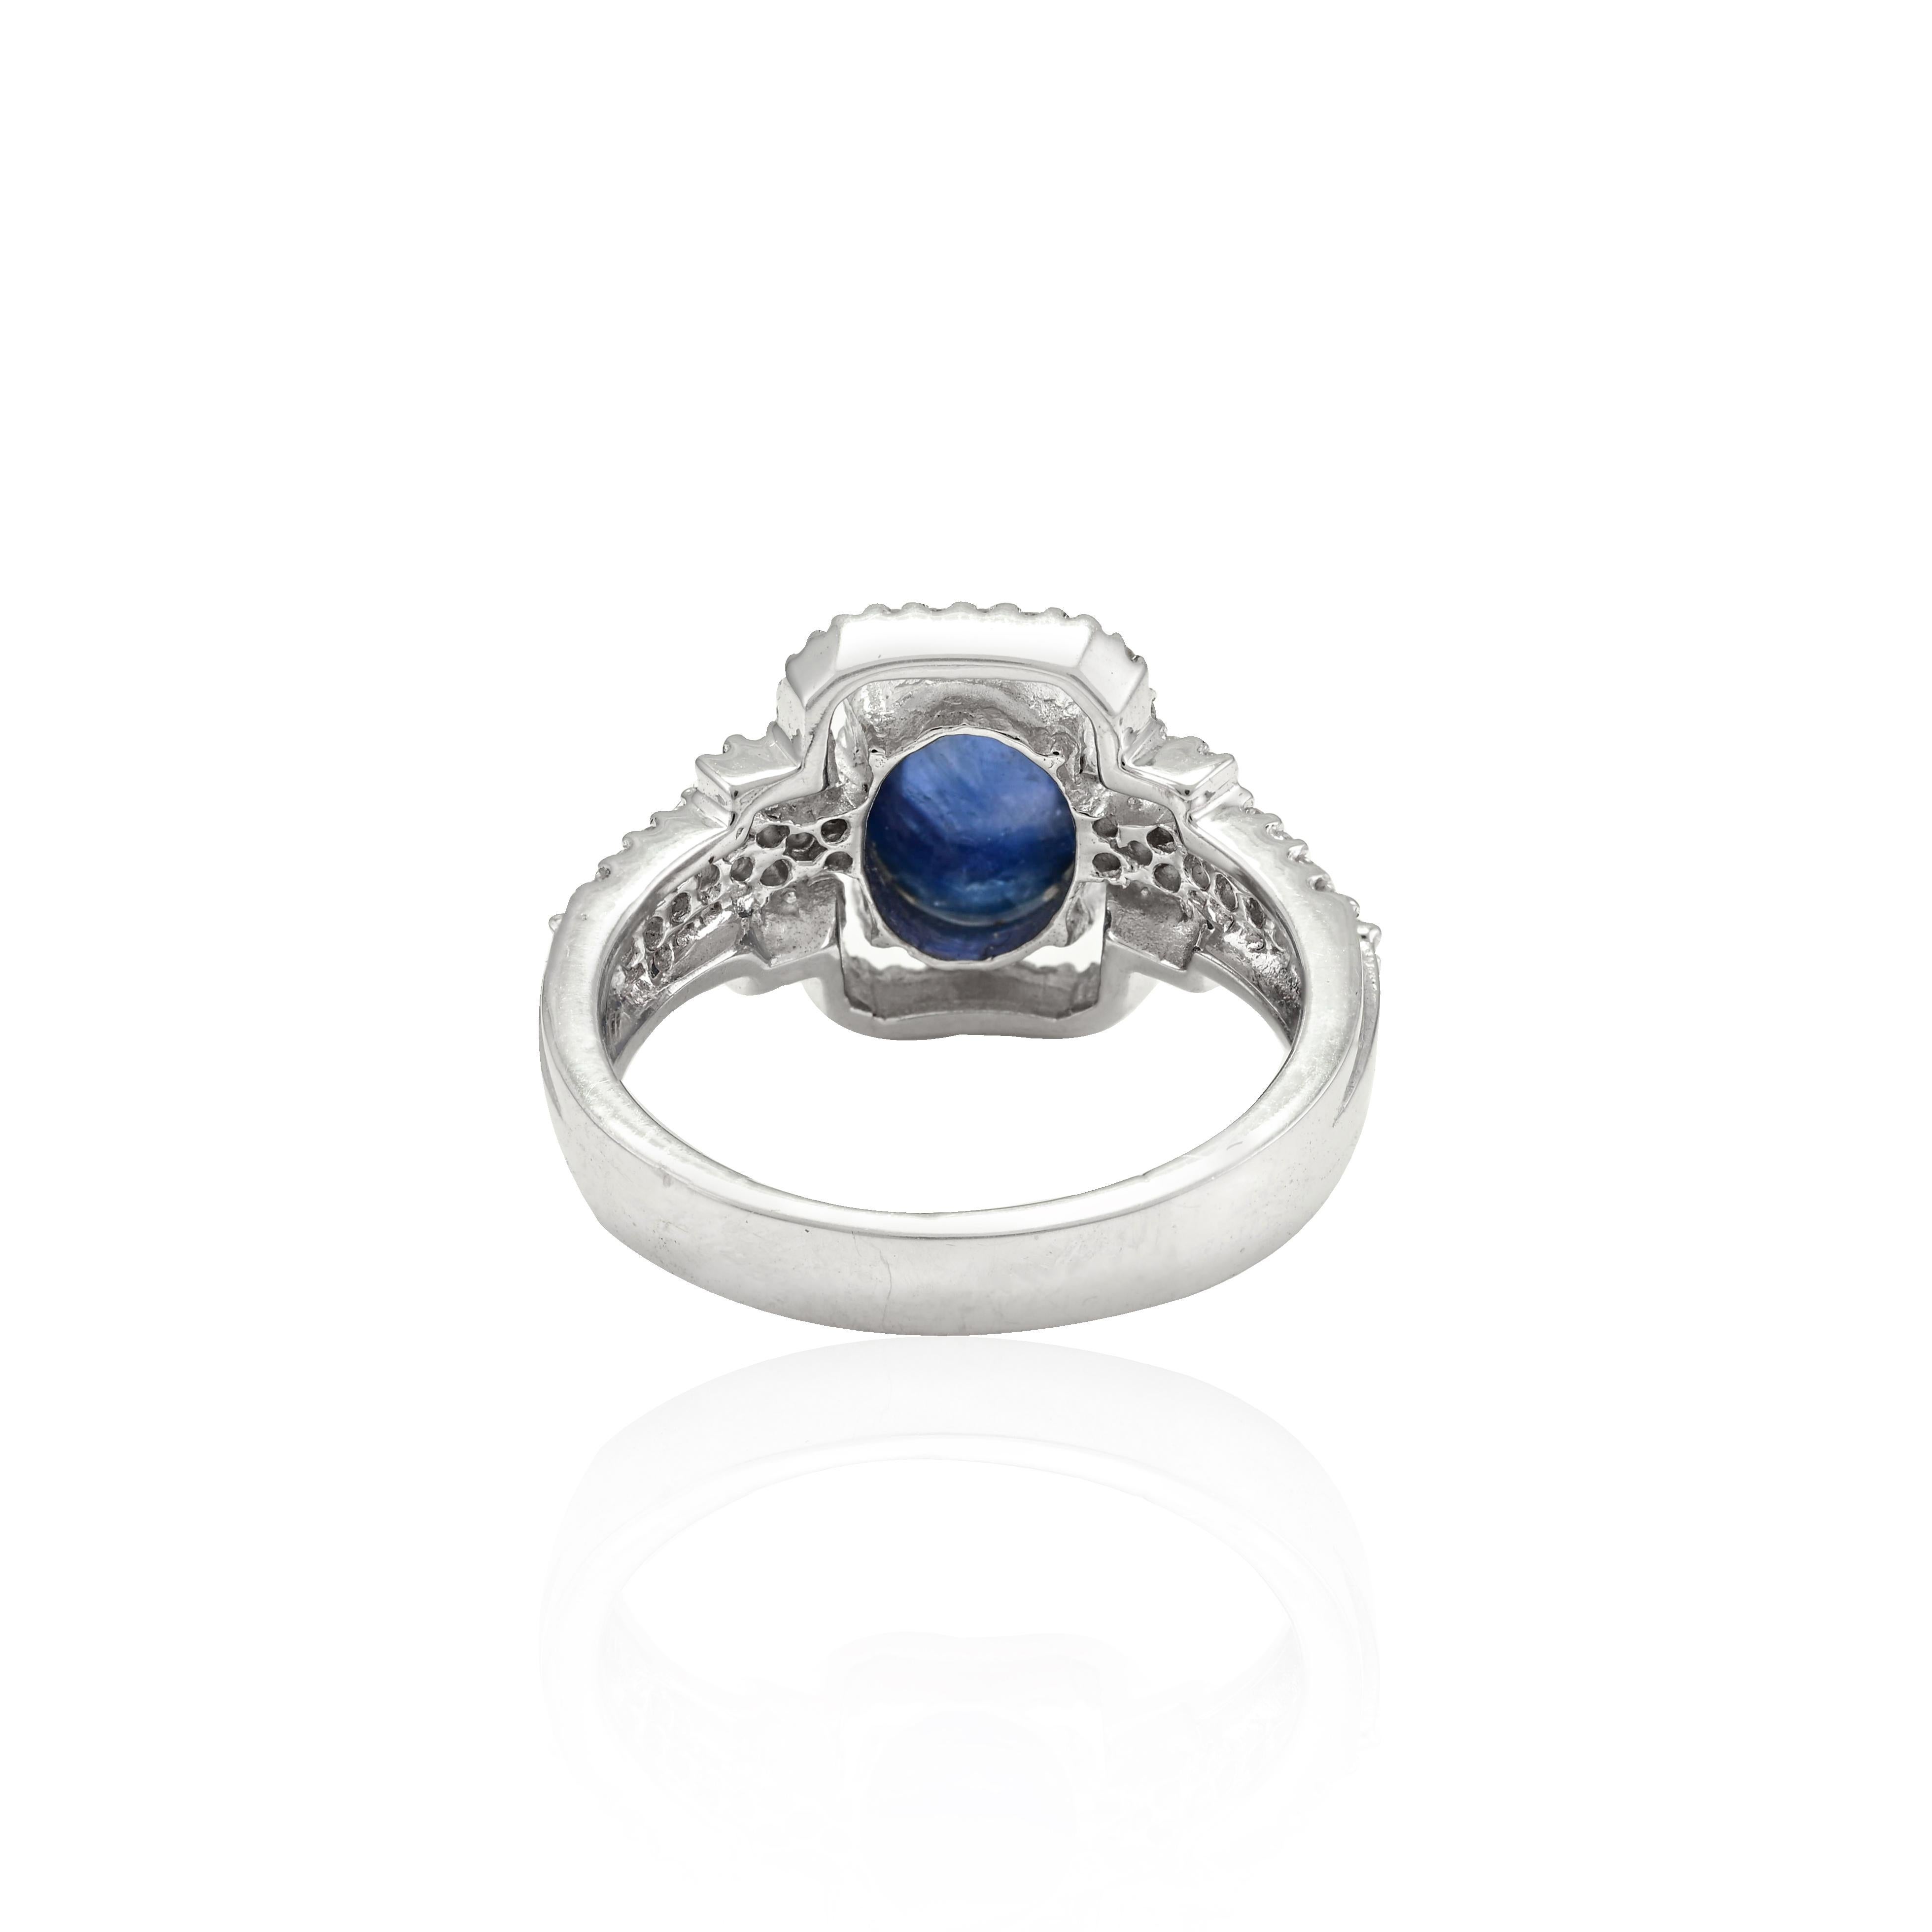 For Sale:  3.01 Ct Blue Sapphire and Diamond Engagement Ring Made 18k Solid White Gold 3